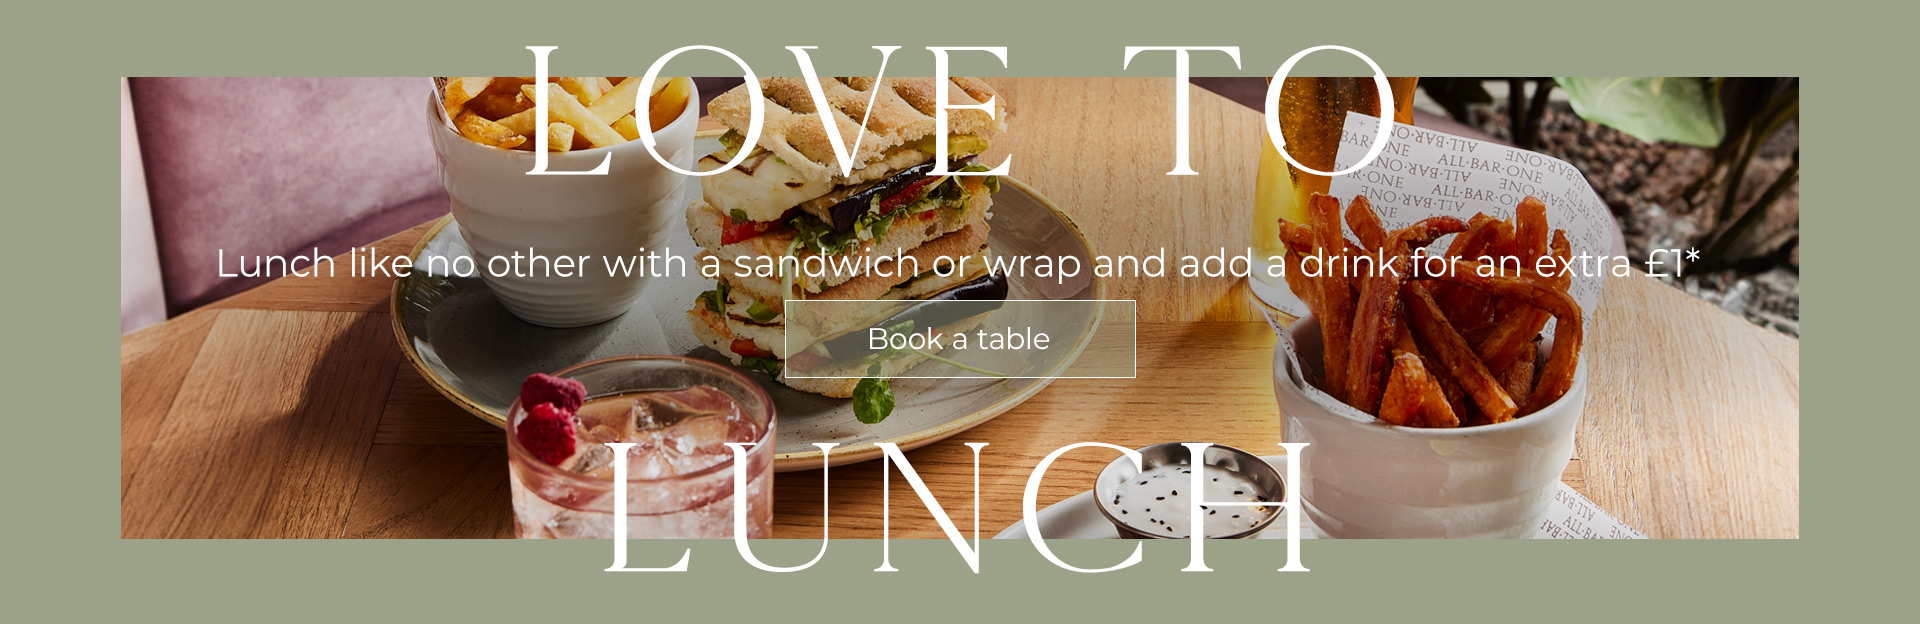 Lunch Offer at All Bar One Nottingham